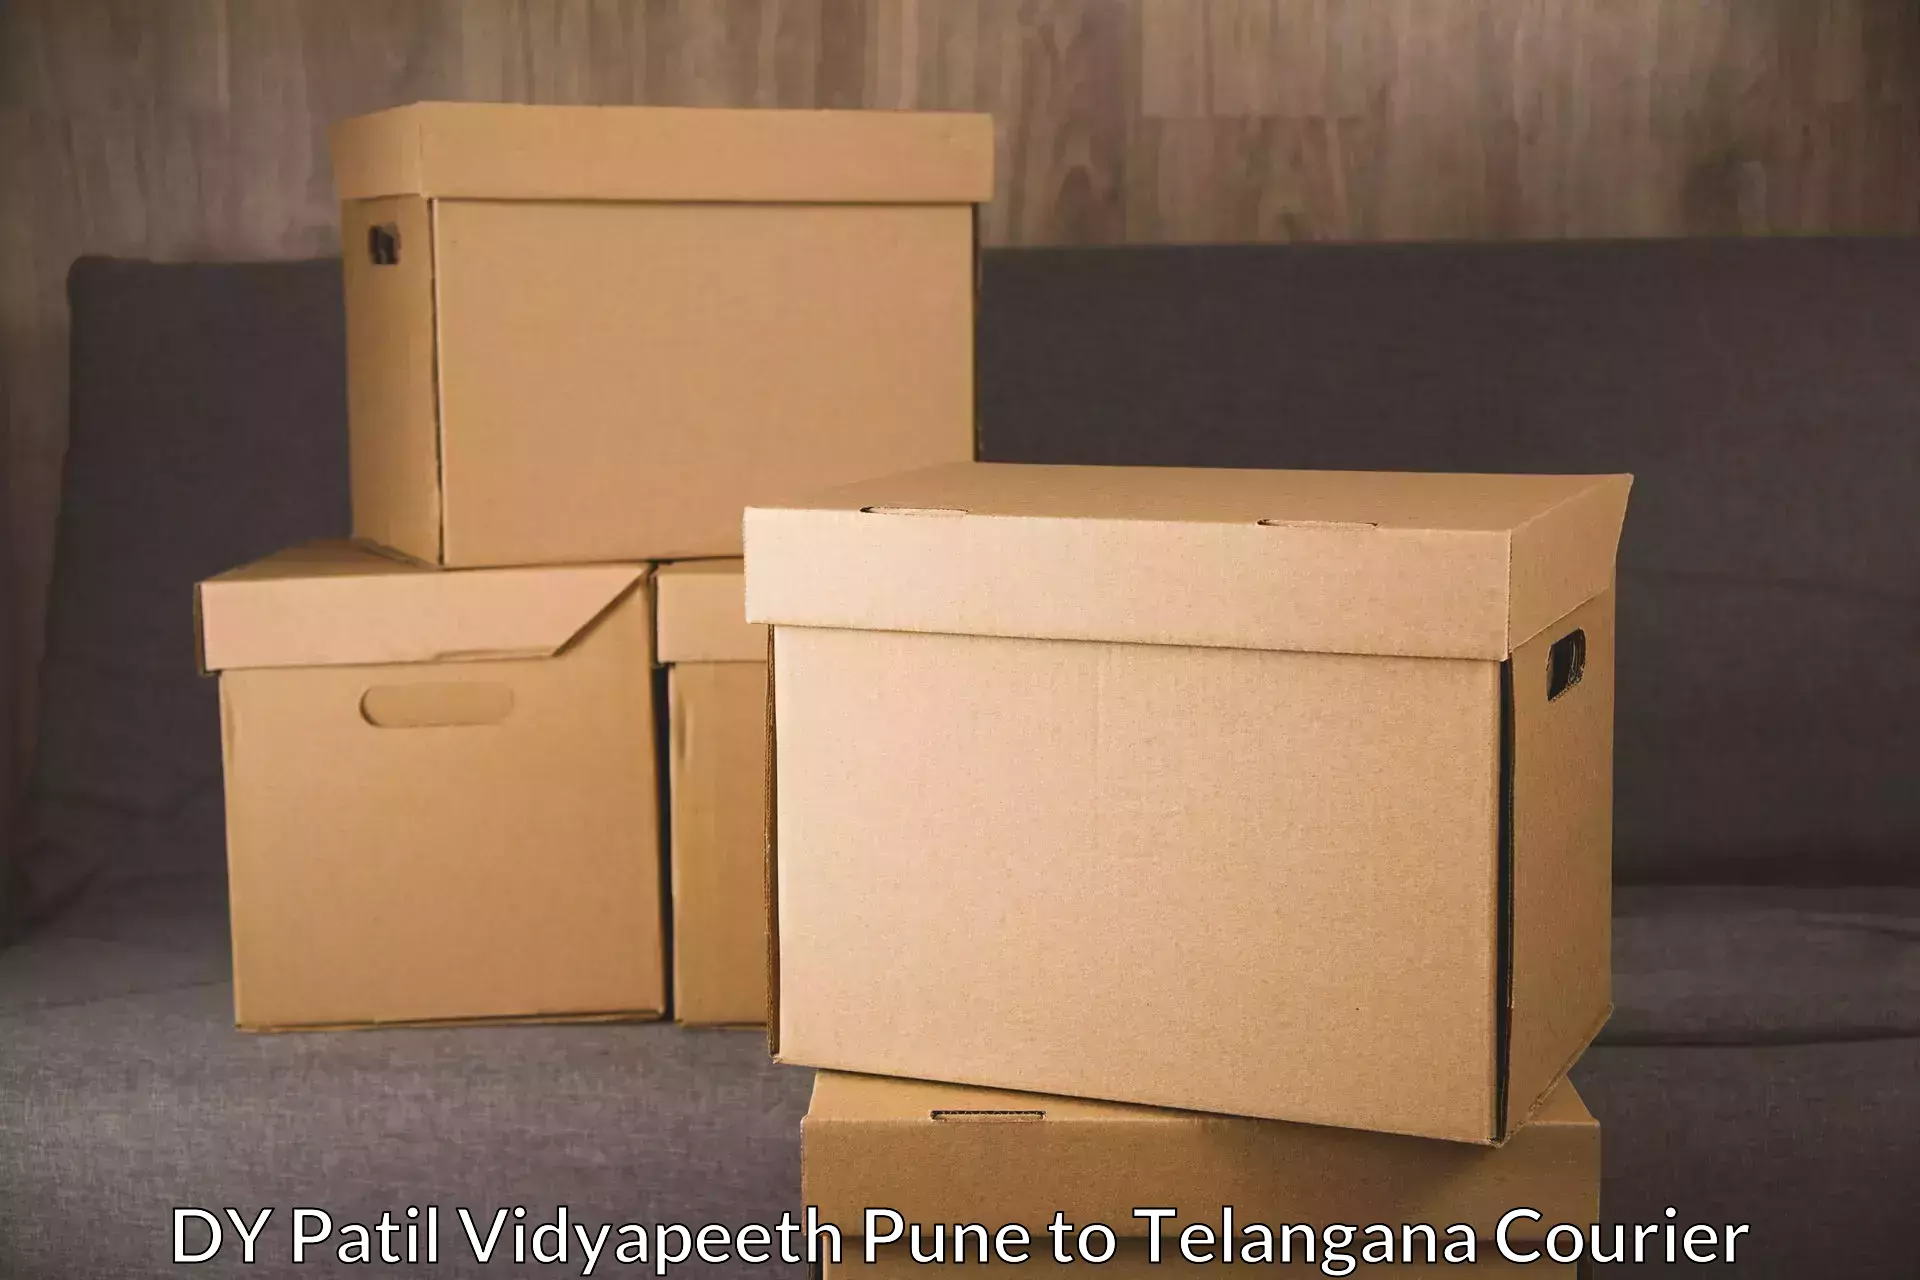 Nationwide shipping services DY Patil Vidyapeeth Pune to Metpally